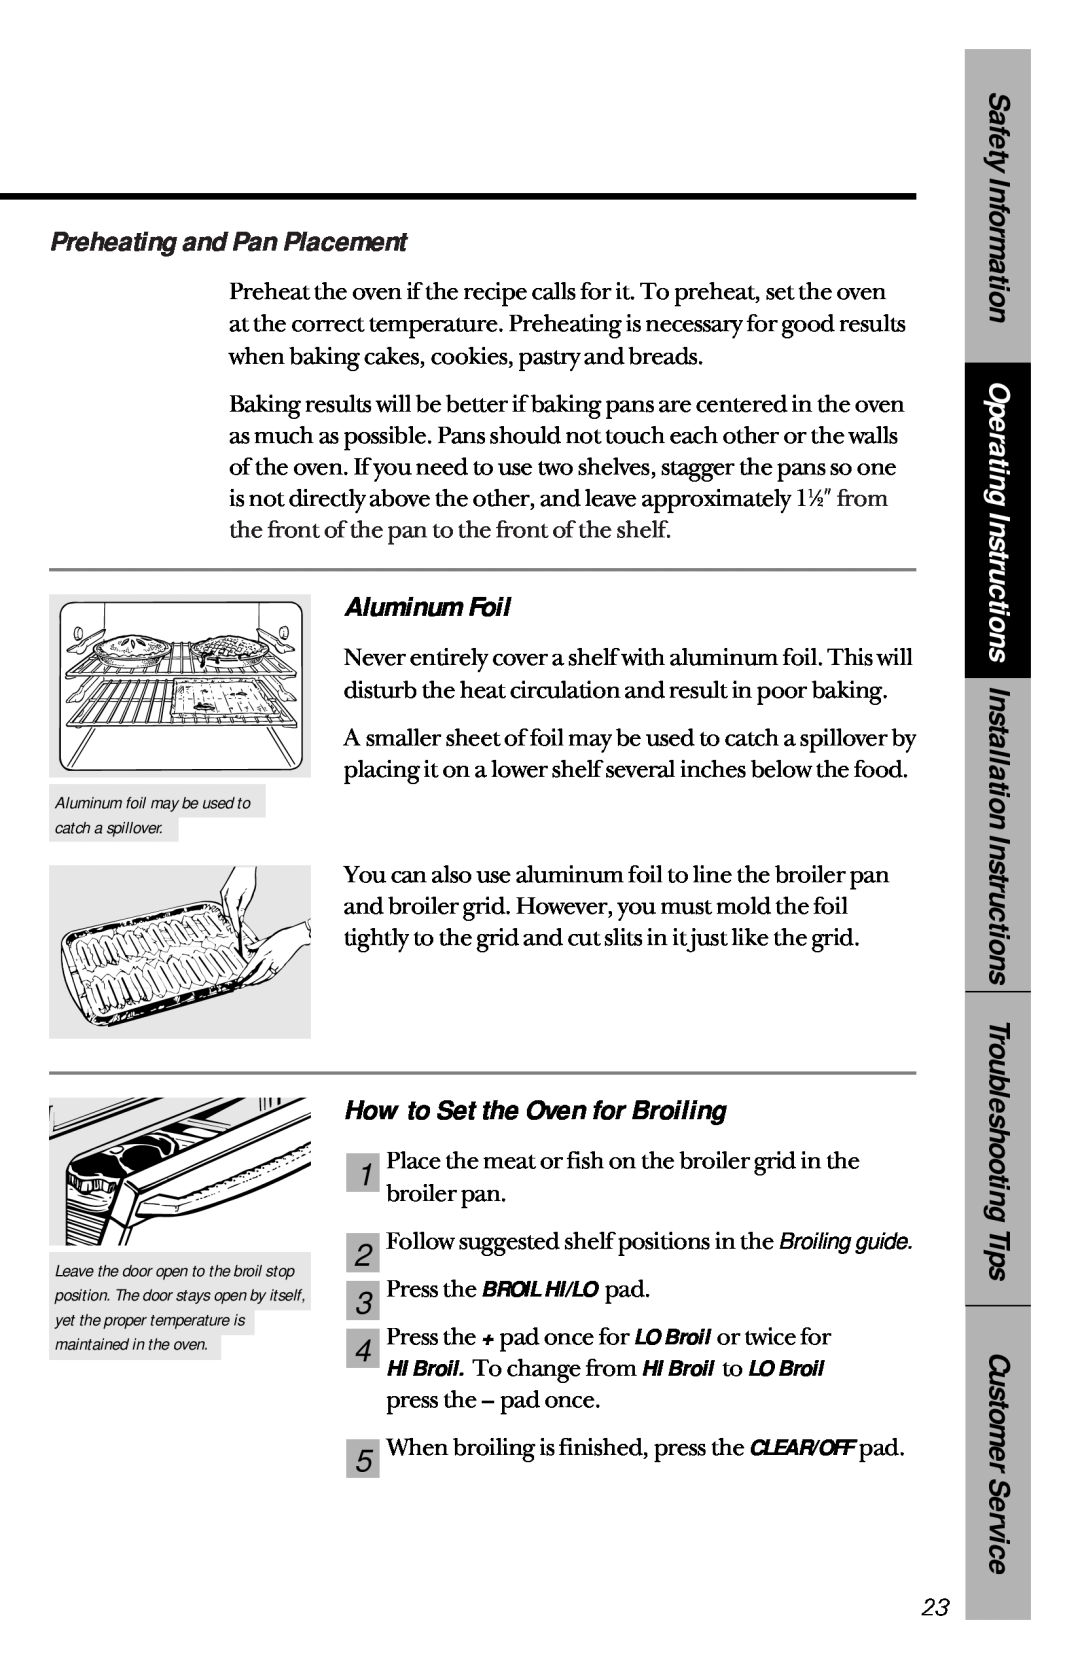 GE 164D3333P069, 49-8827 owner manual Preheating and Pan Placement, Aluminum Foil, How to Set the Oven for Broiling 